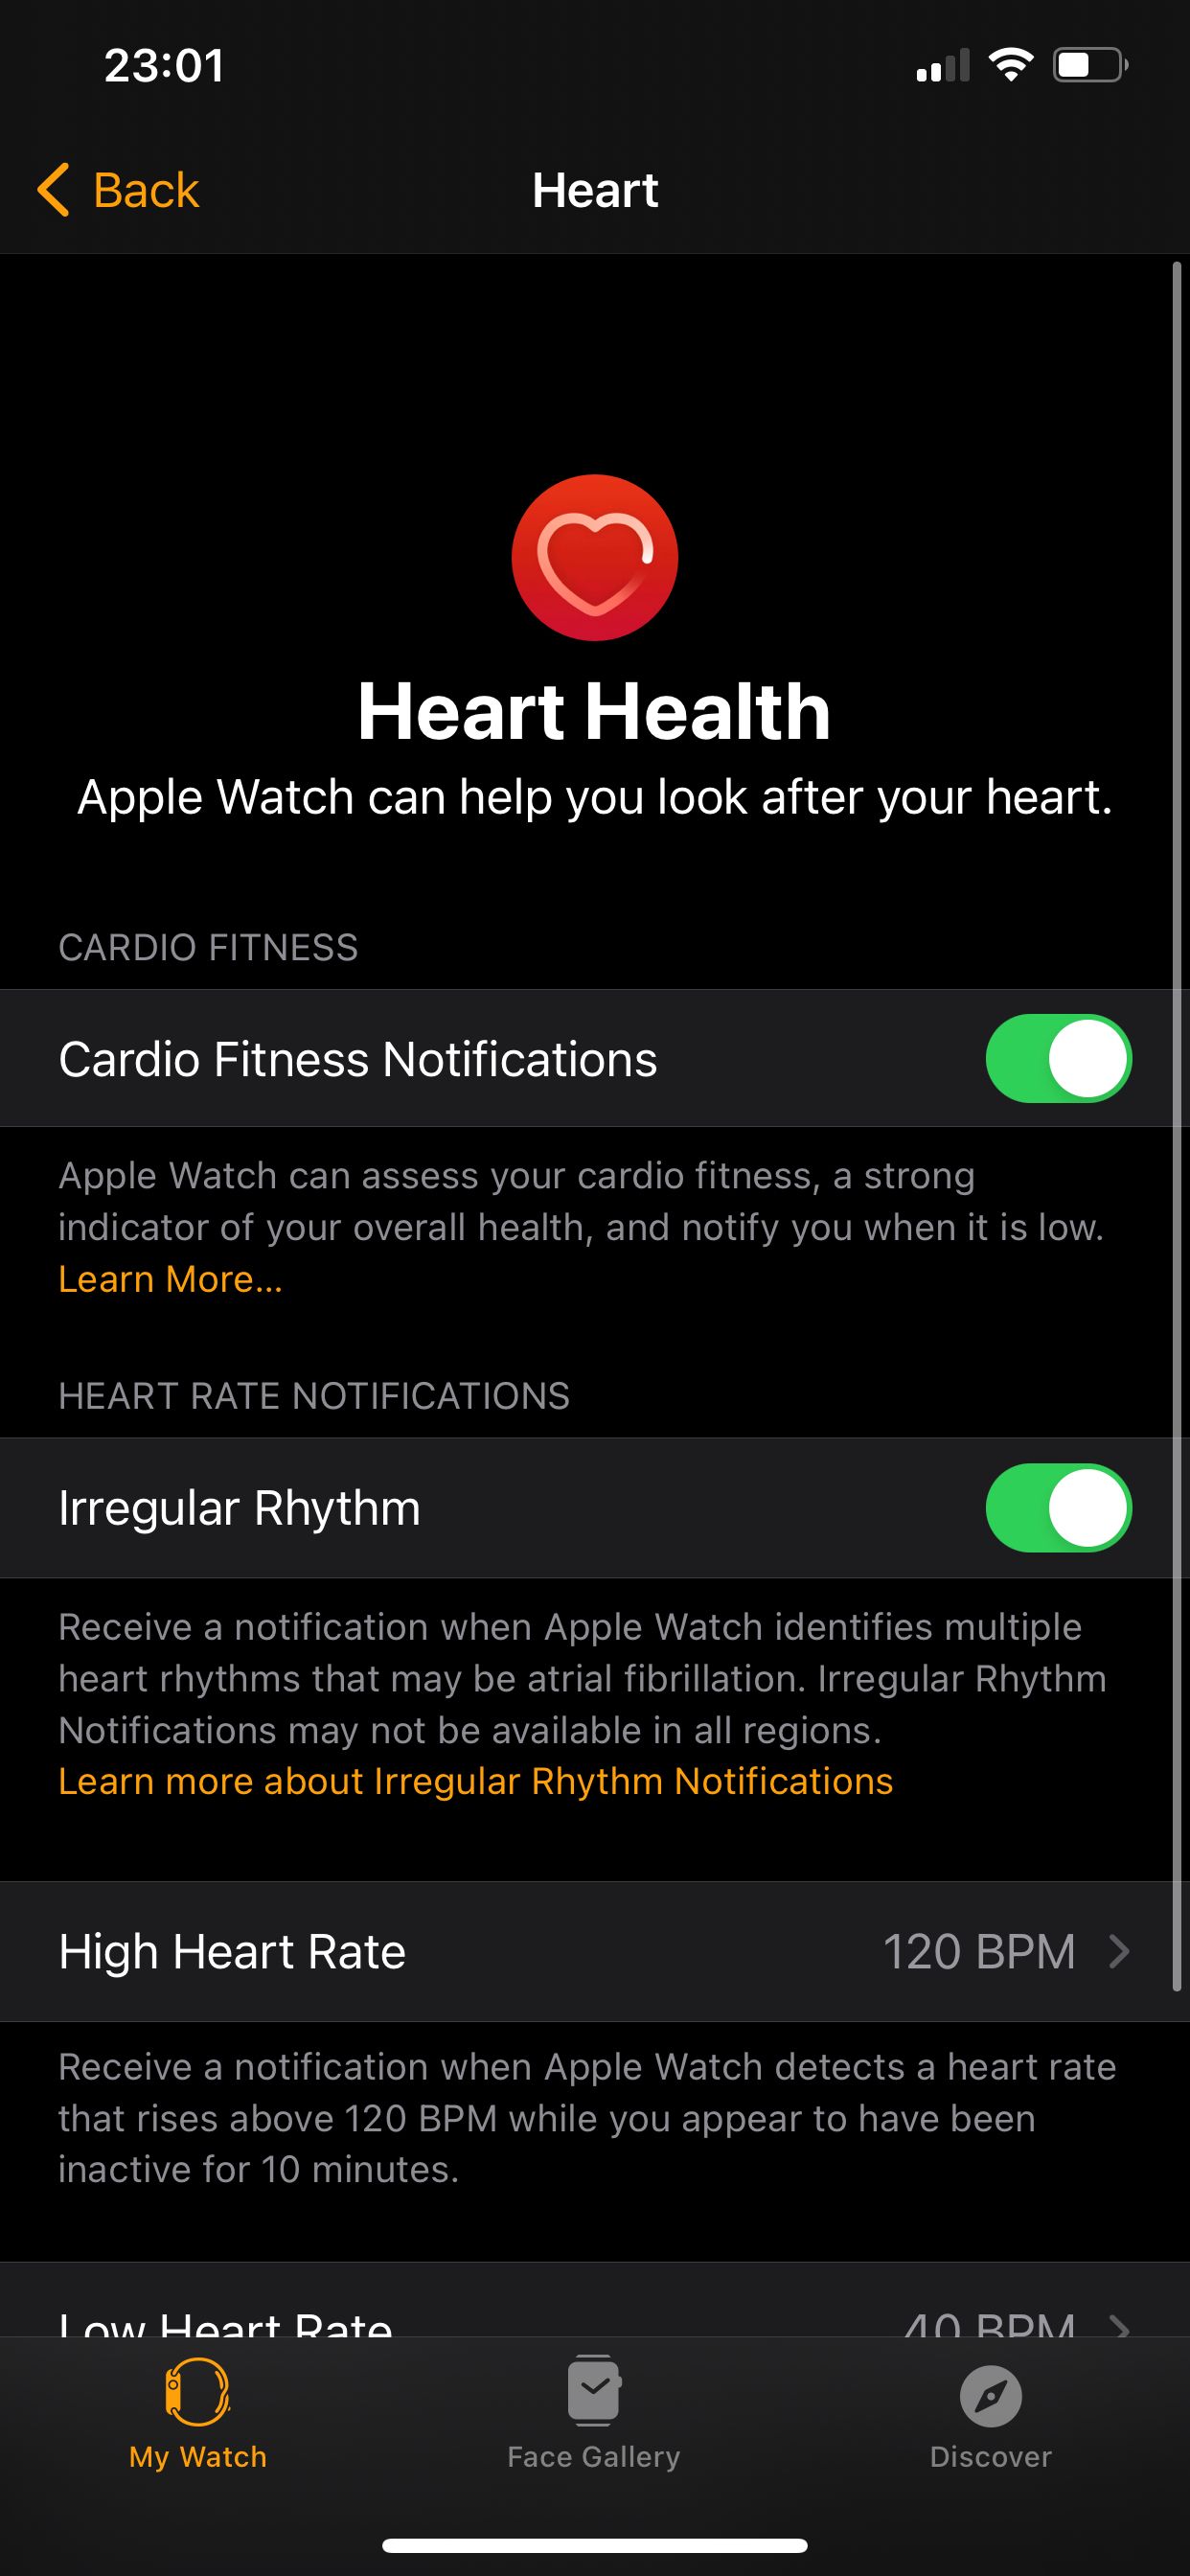 Cardio fitness notifications option in Watch settings.